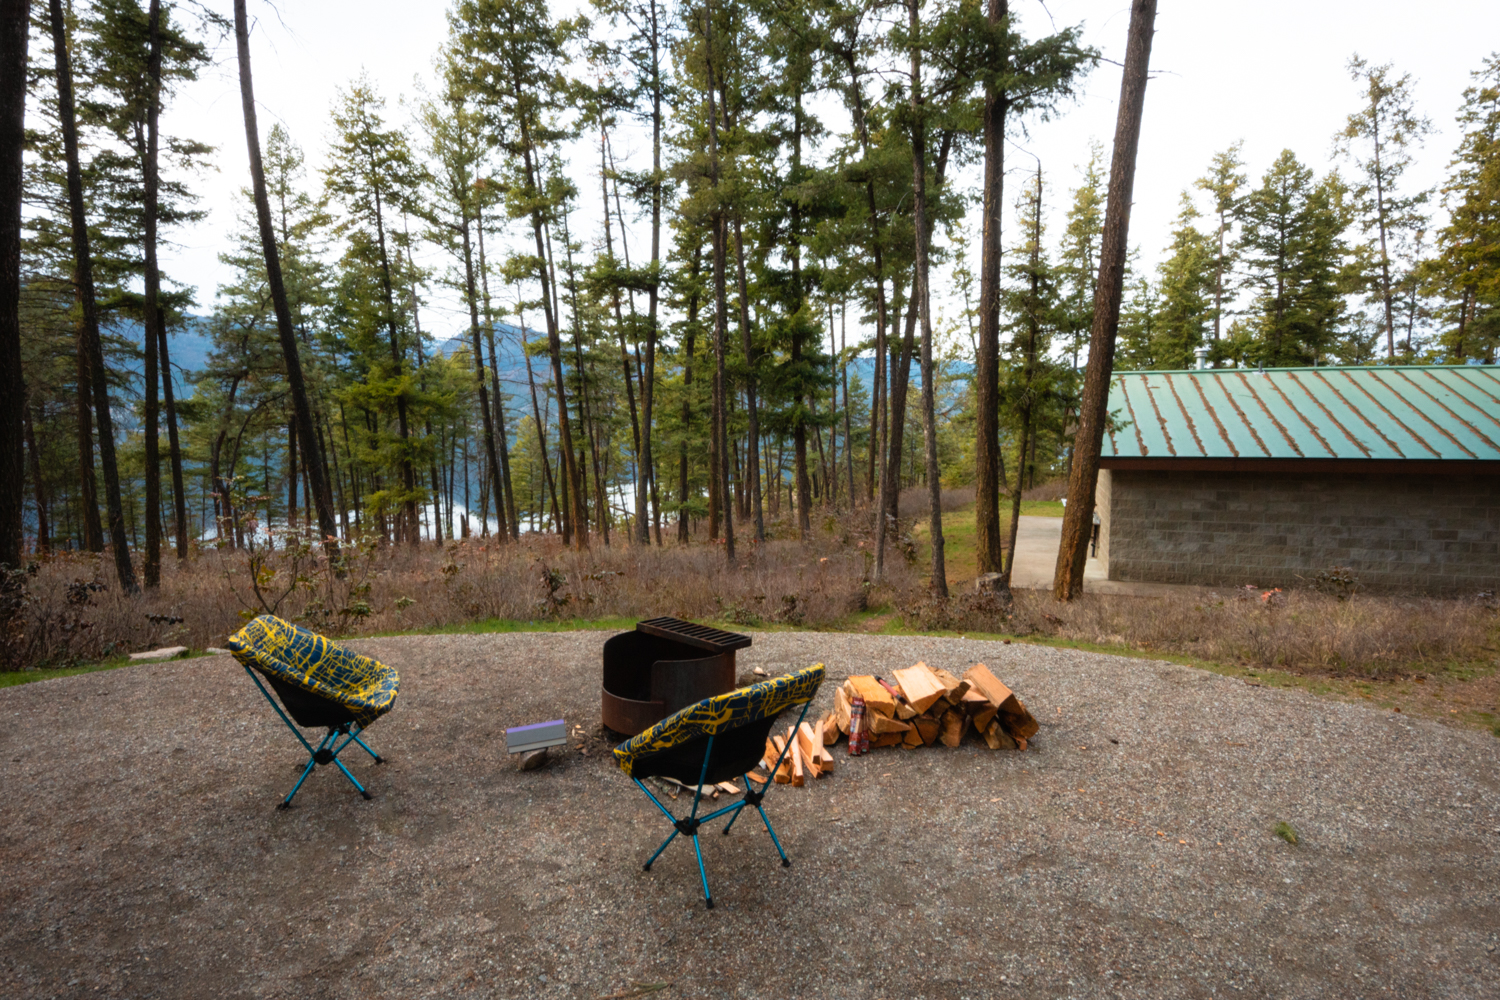 Chairs set up around a campfire pit at a campsite at Ellison campground